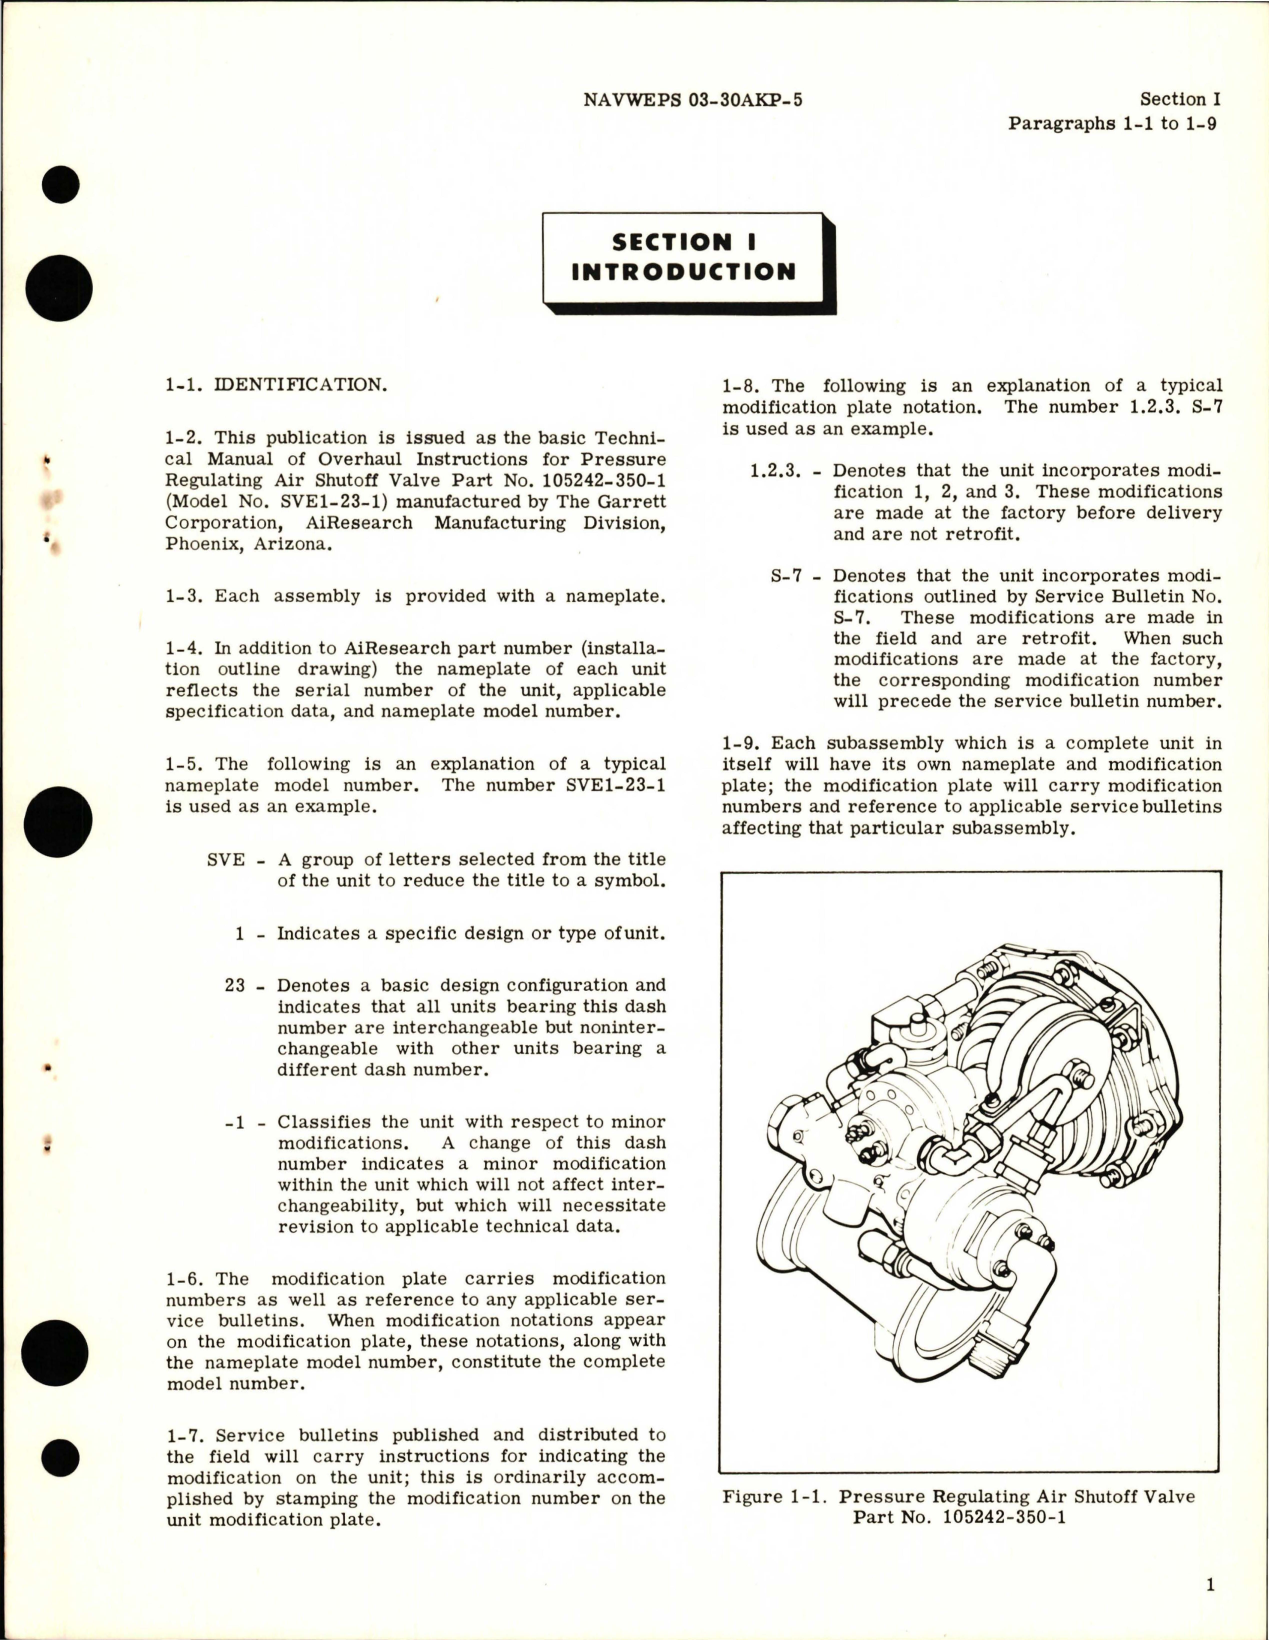 Sample page 5 from AirCorps Library document: Overhaul Instructions for Pressure Regulating Air Shutoff Valve - Part 105242-350-1